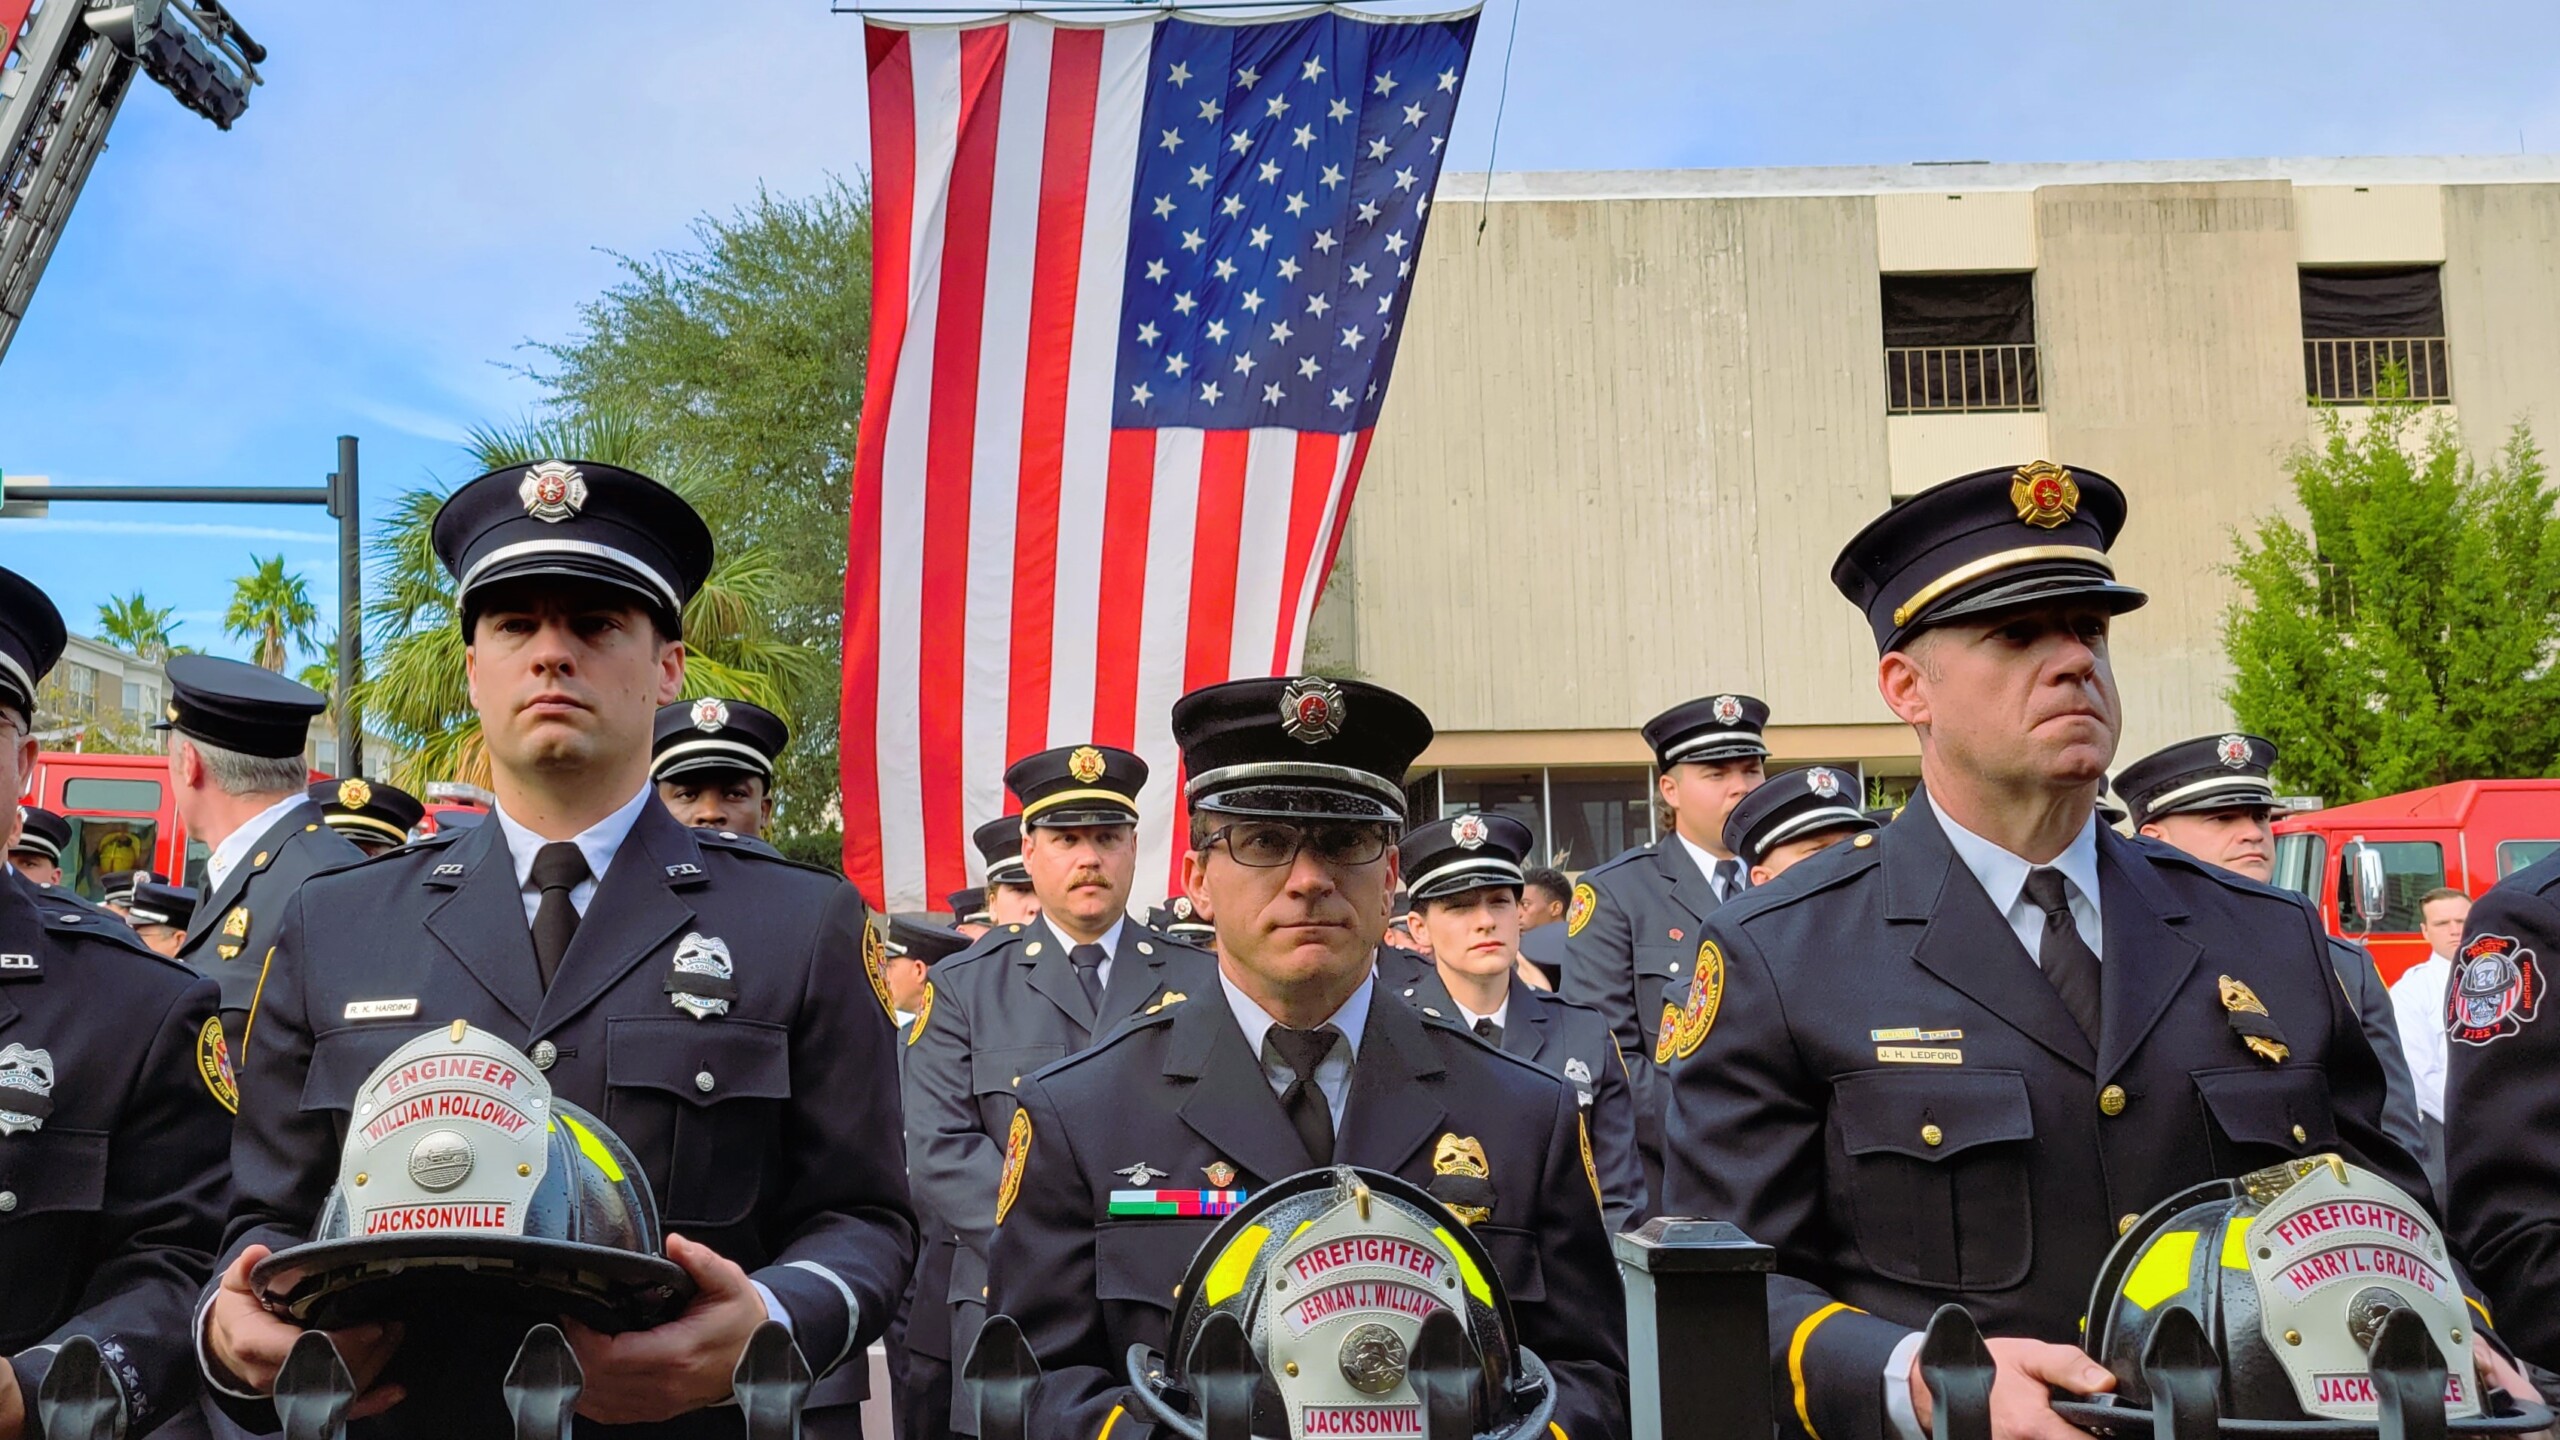 Featured image for “Jacksonville firefighters honor those who have died in the line of duty”